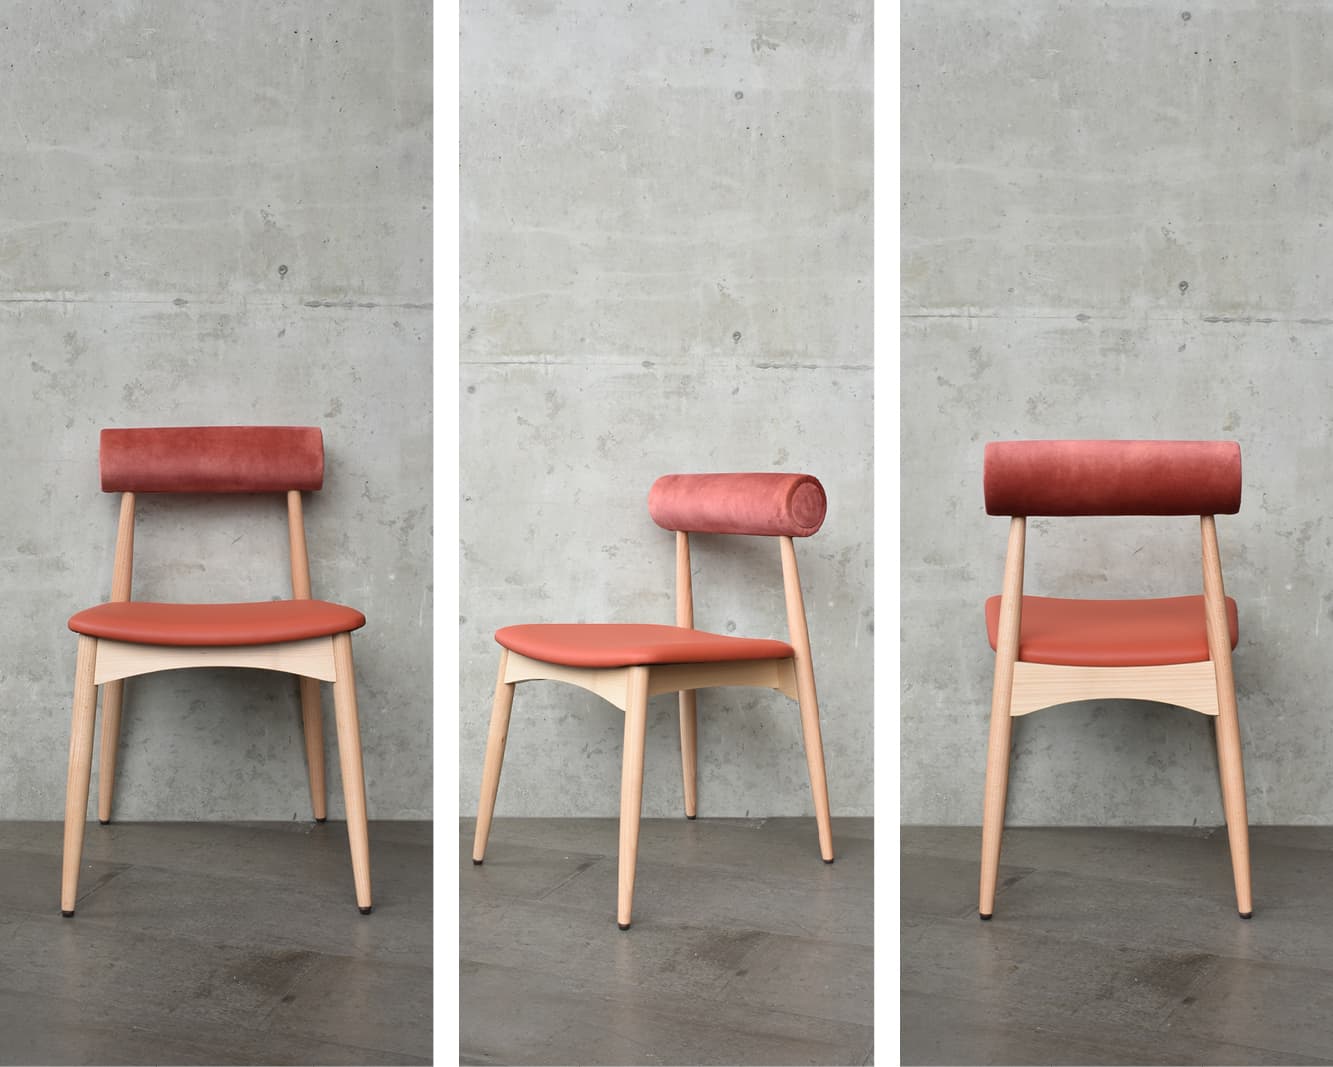 Rolla side chair - New furniture for hospitality as seen at the Salone del Mobile Milano April, 2019